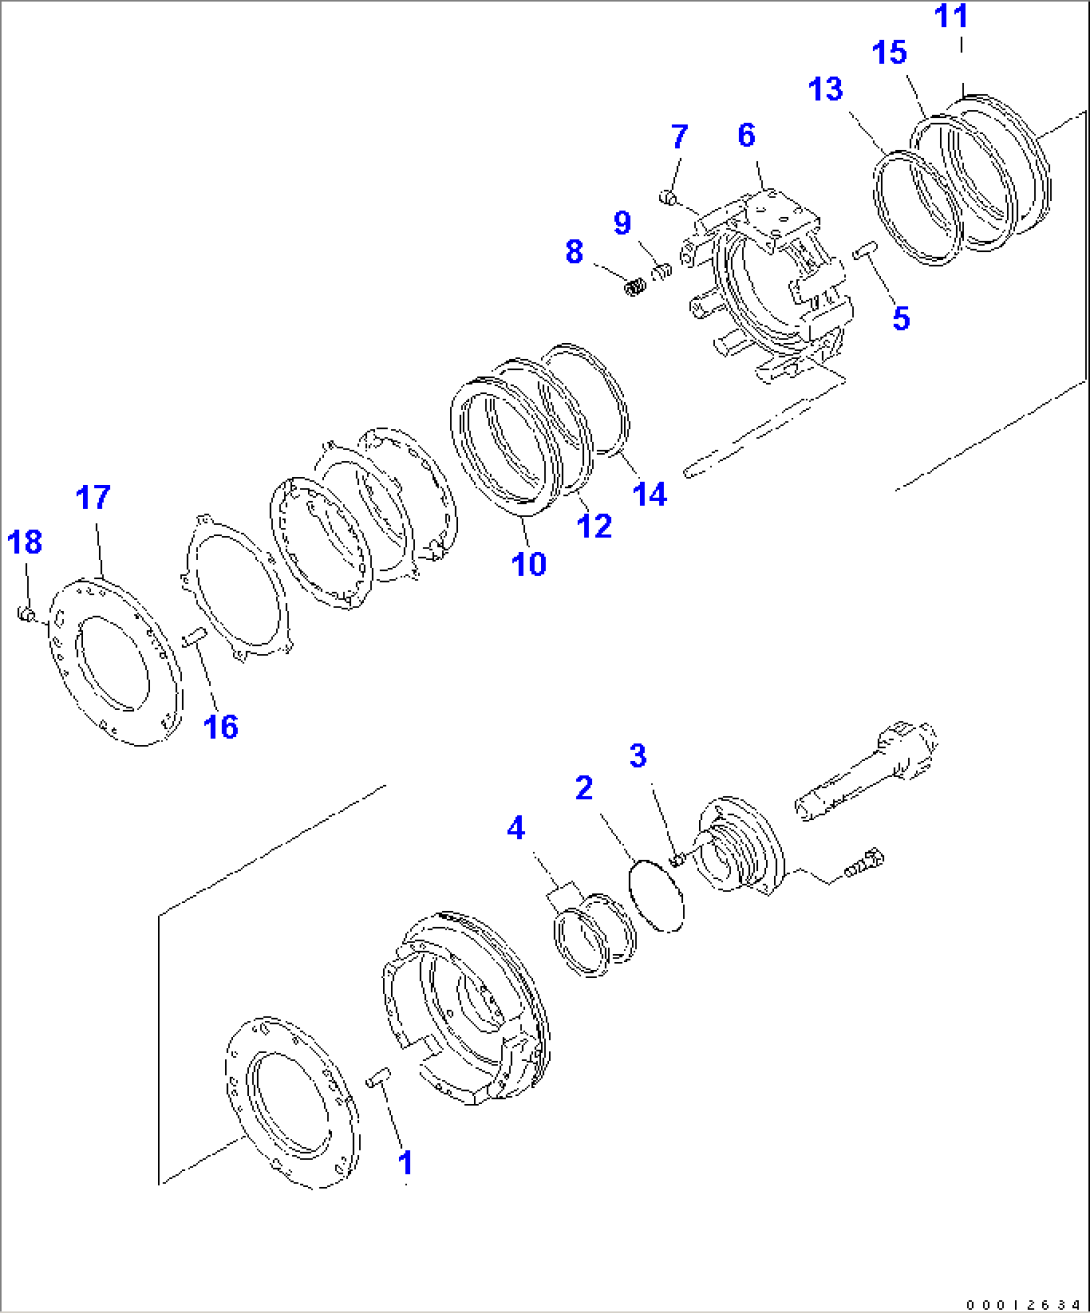 TRANSMISSION (FOR F3-R3 TRANSMISSION) (FORWARD AND 3RD HOUSING) (FOR MONO LEVER STEERING)